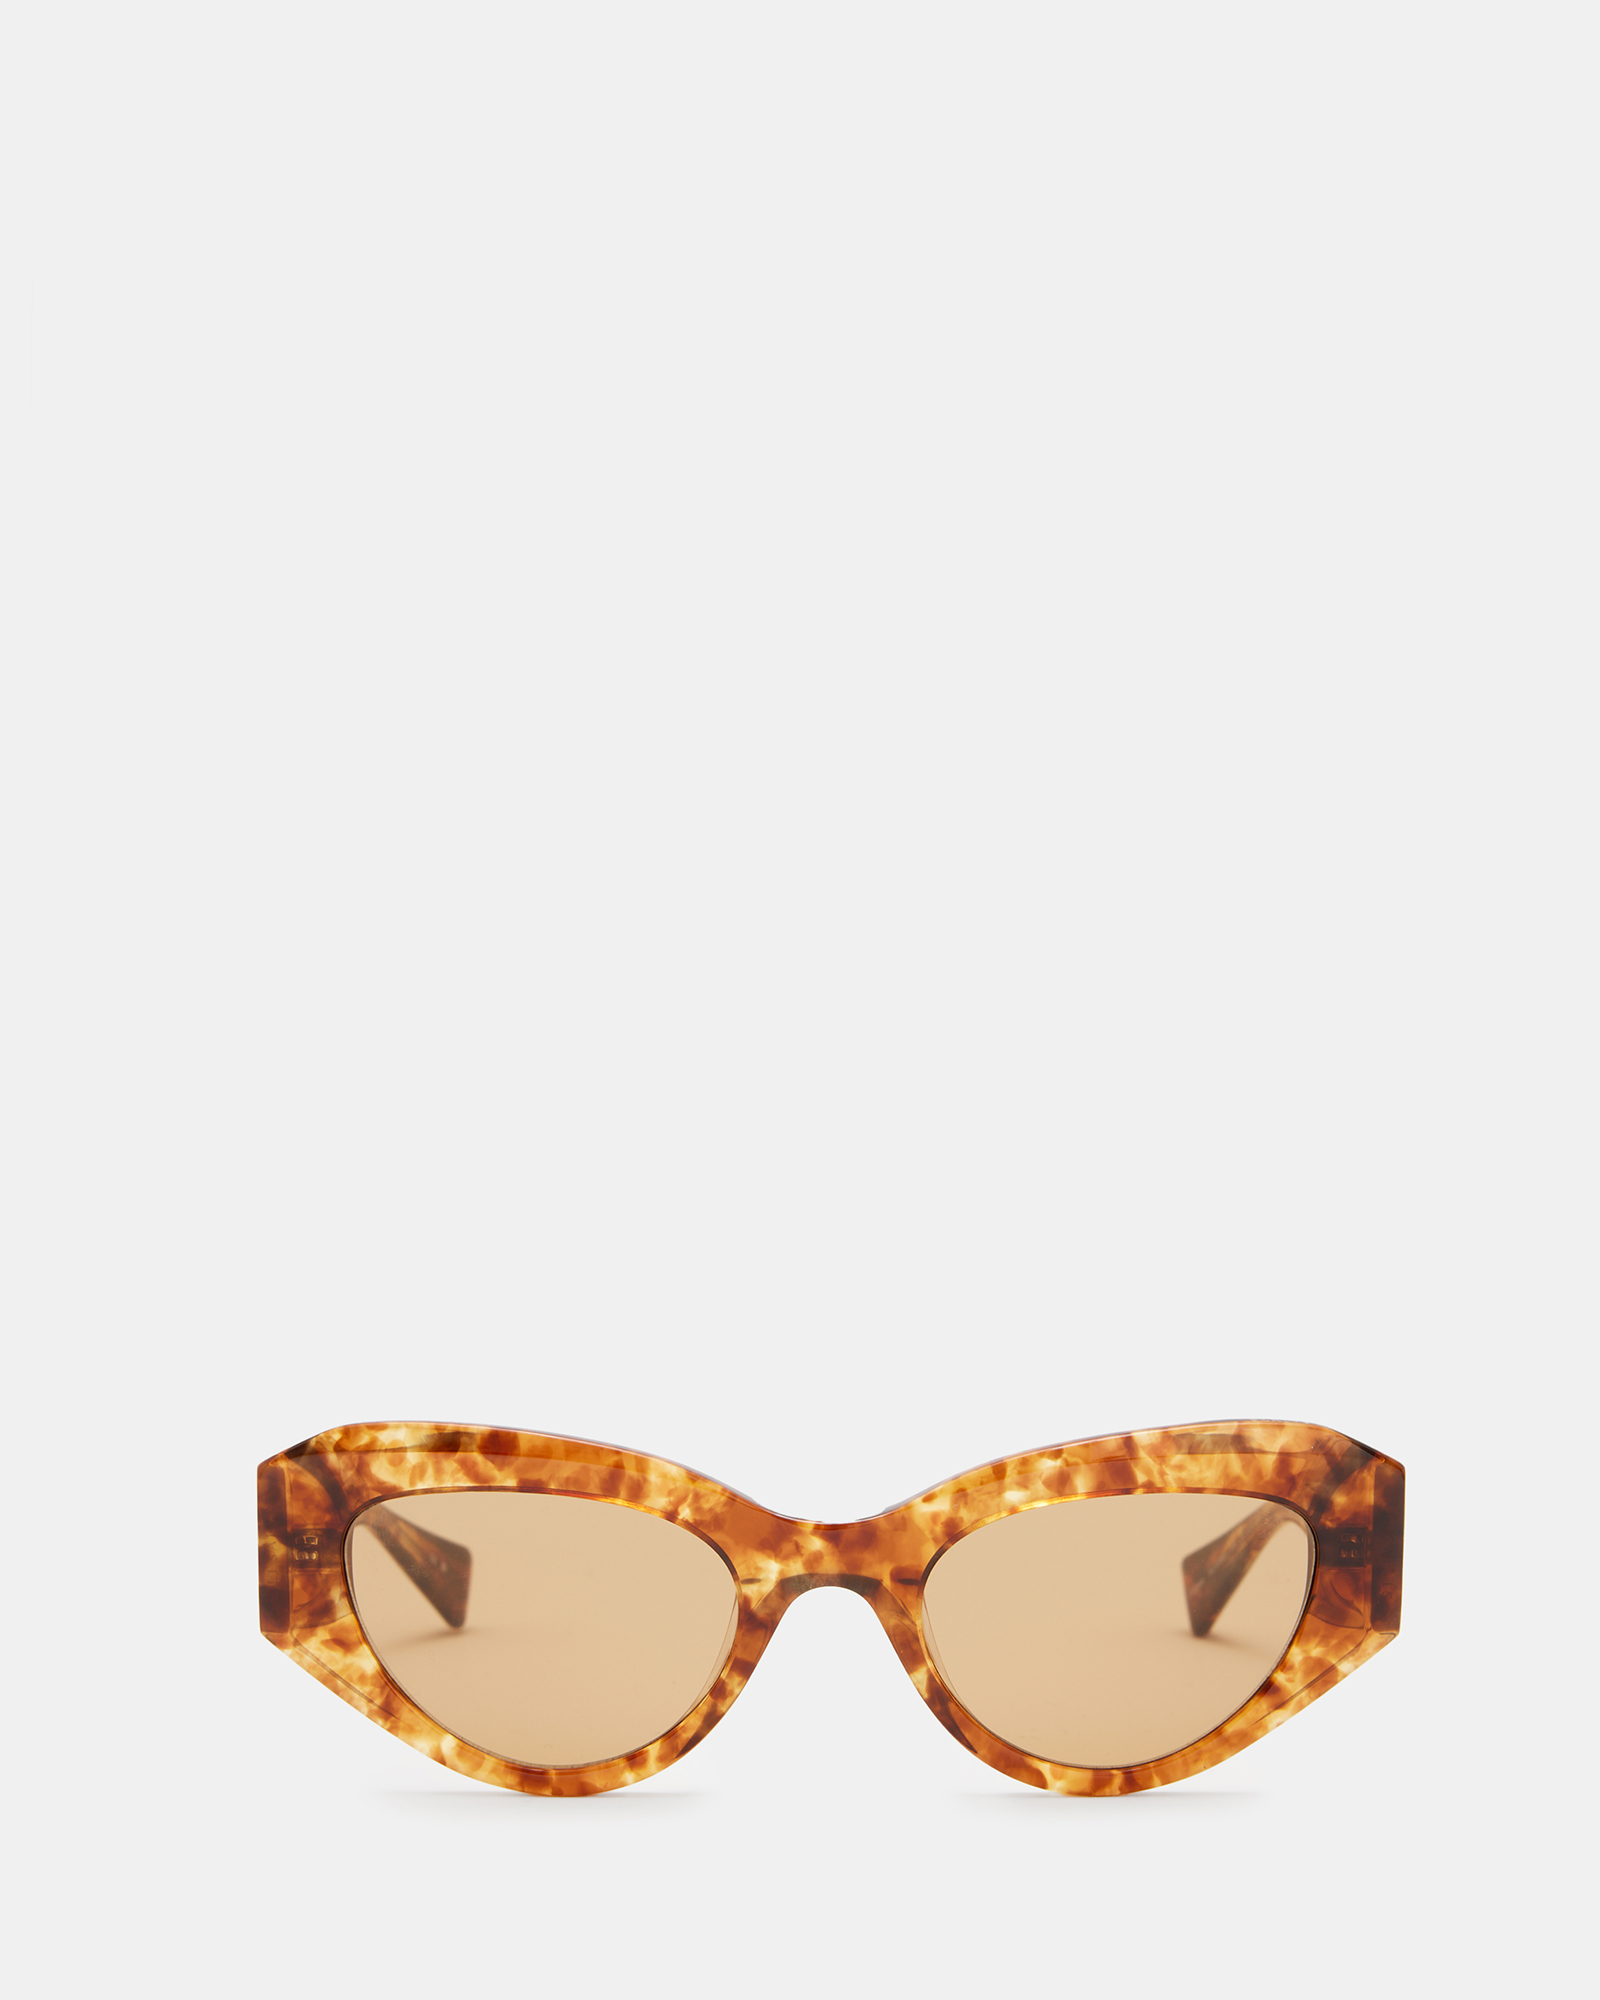 AllSaints Calypso Bevelled Cat Eye Sunglasses,, Brown, Size: One Size